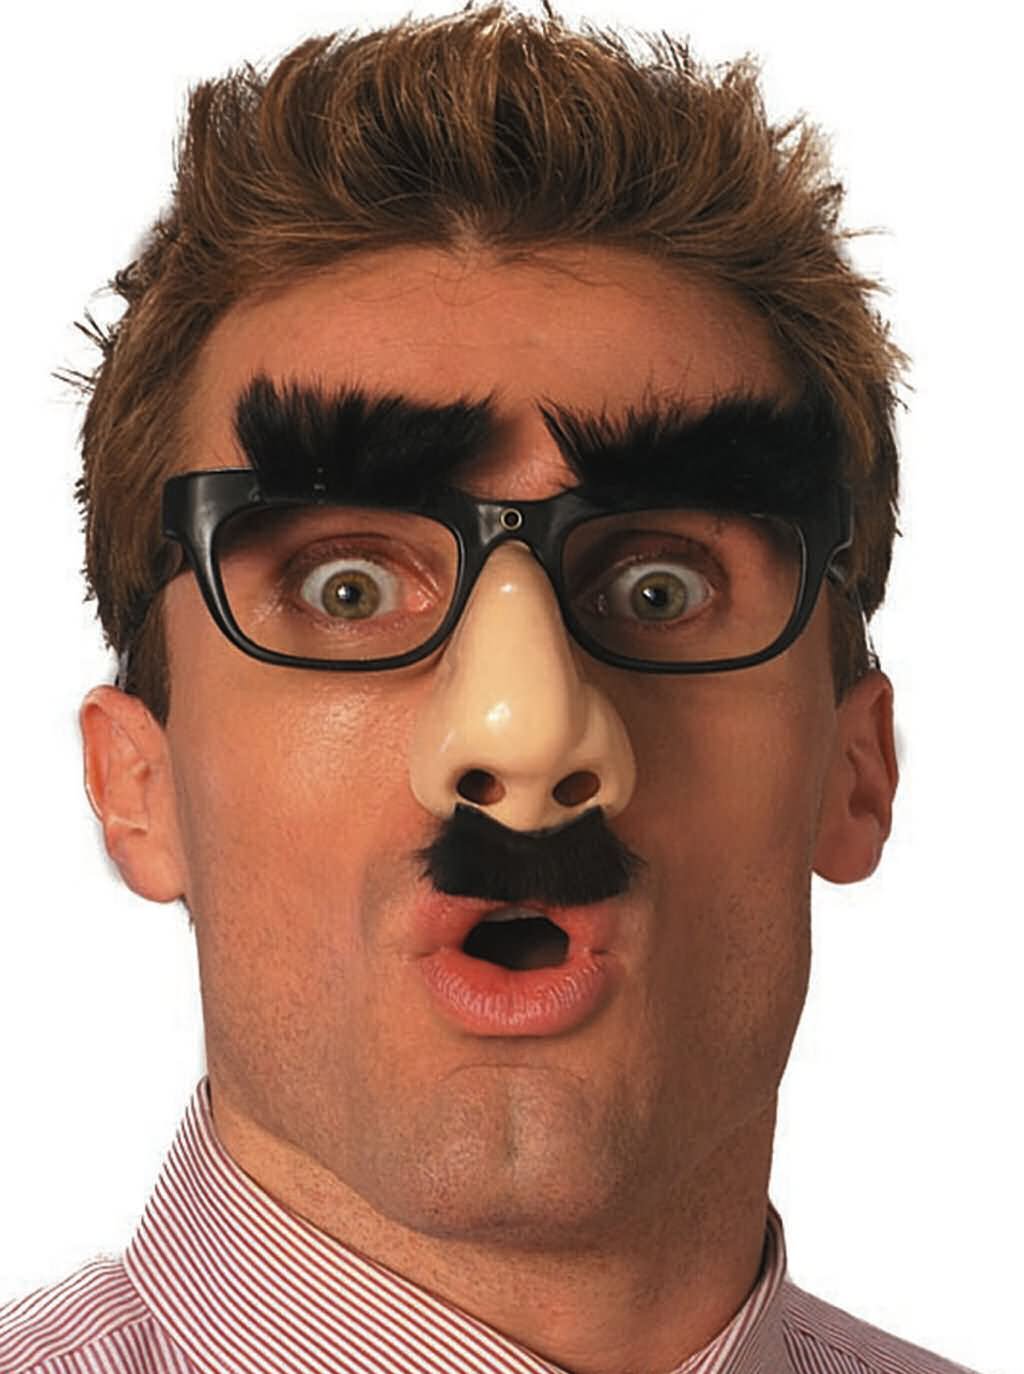 Man With Funny Glasses